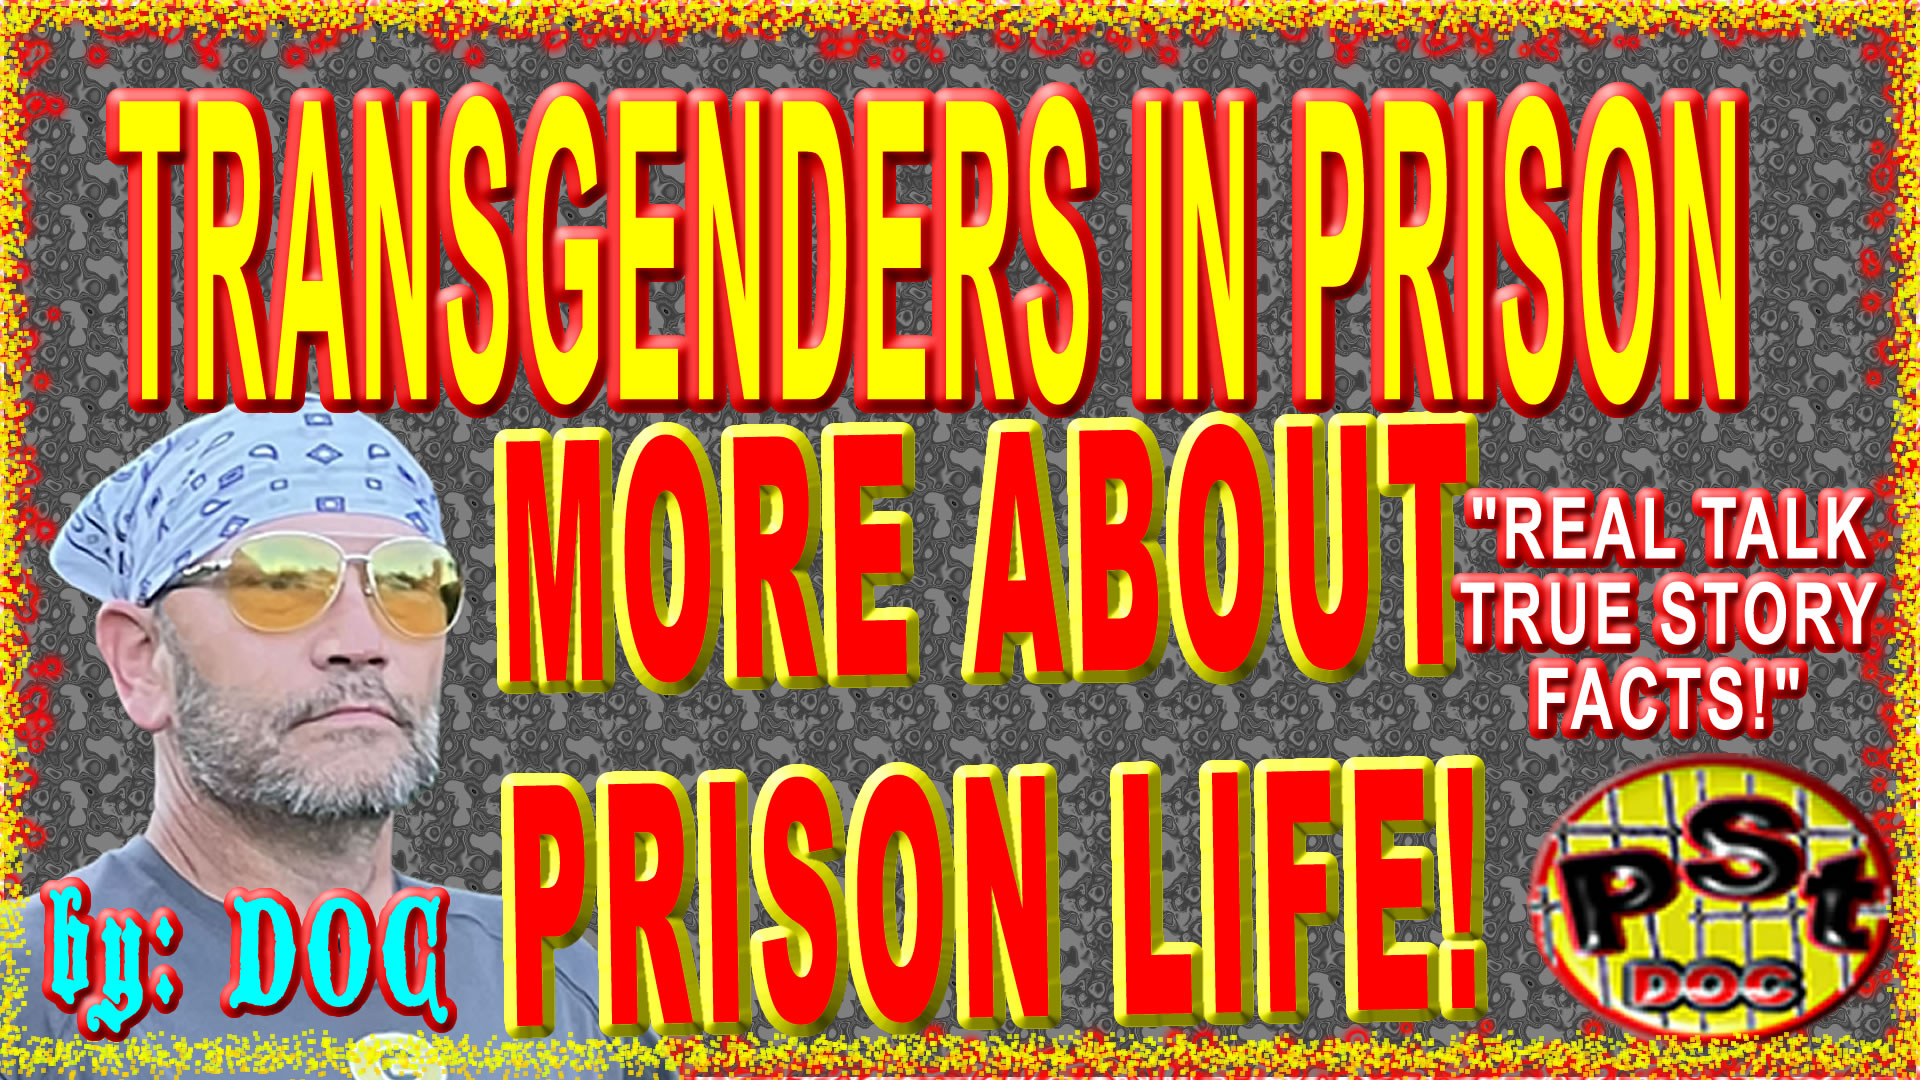 CLICK TO VIEW DOCS VIDEO ABOUT TRANGENDERS in PRISON and more About Life in Prison